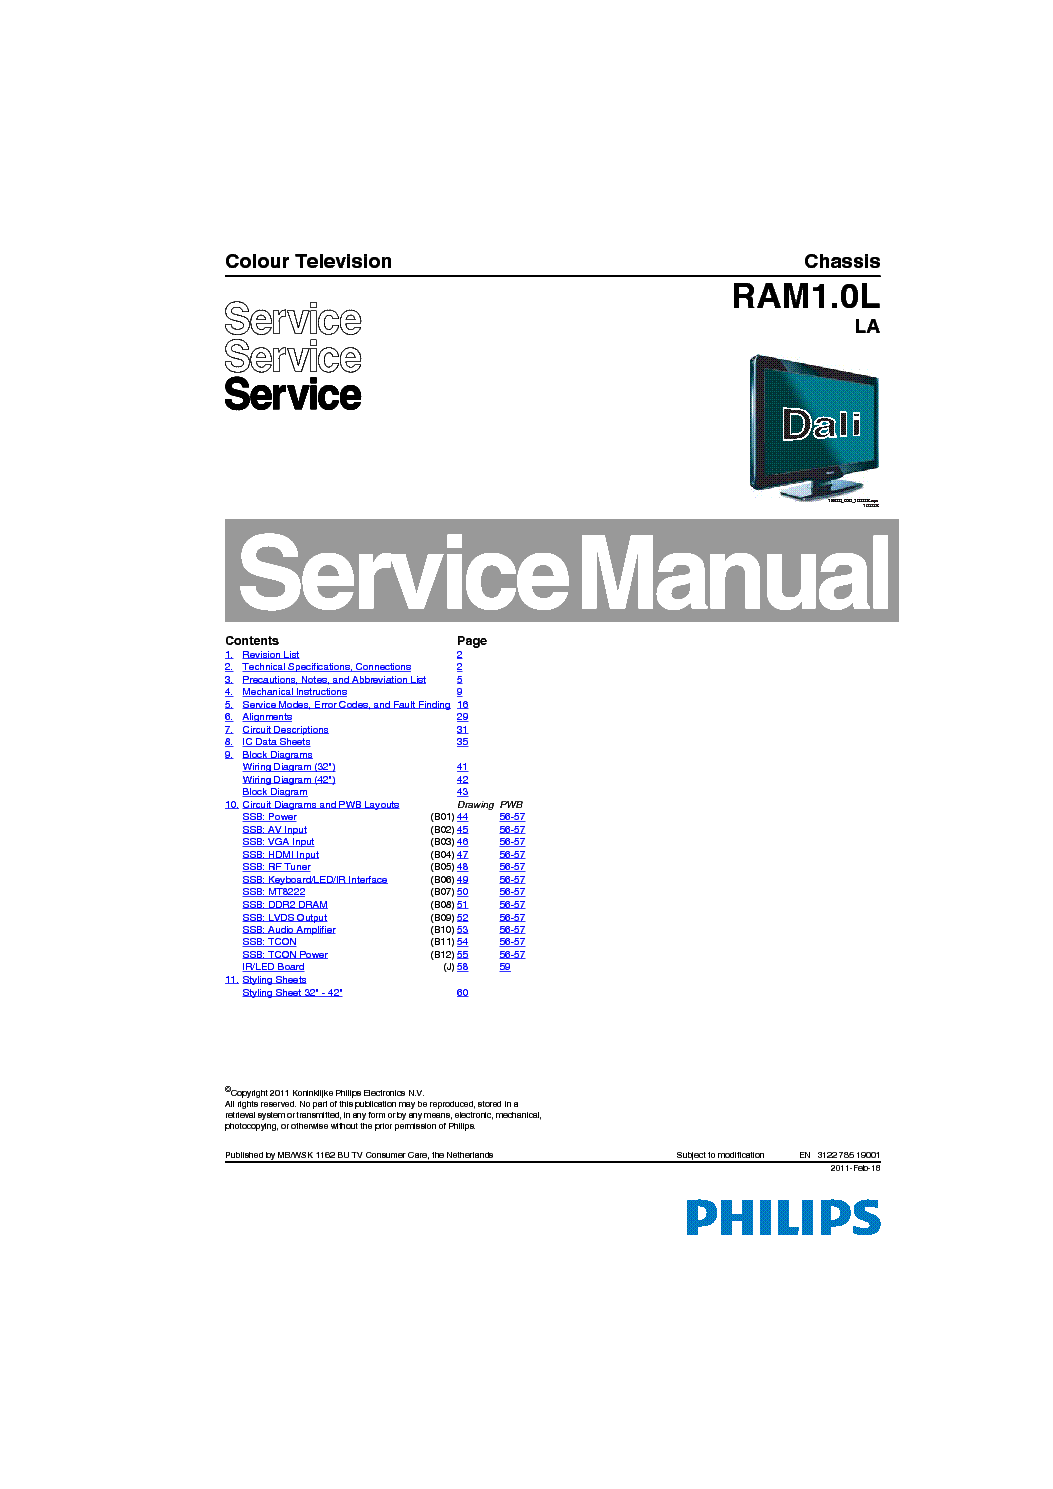 PHILIPS CHASSIS RAM1.0LLA service manual (1st page)